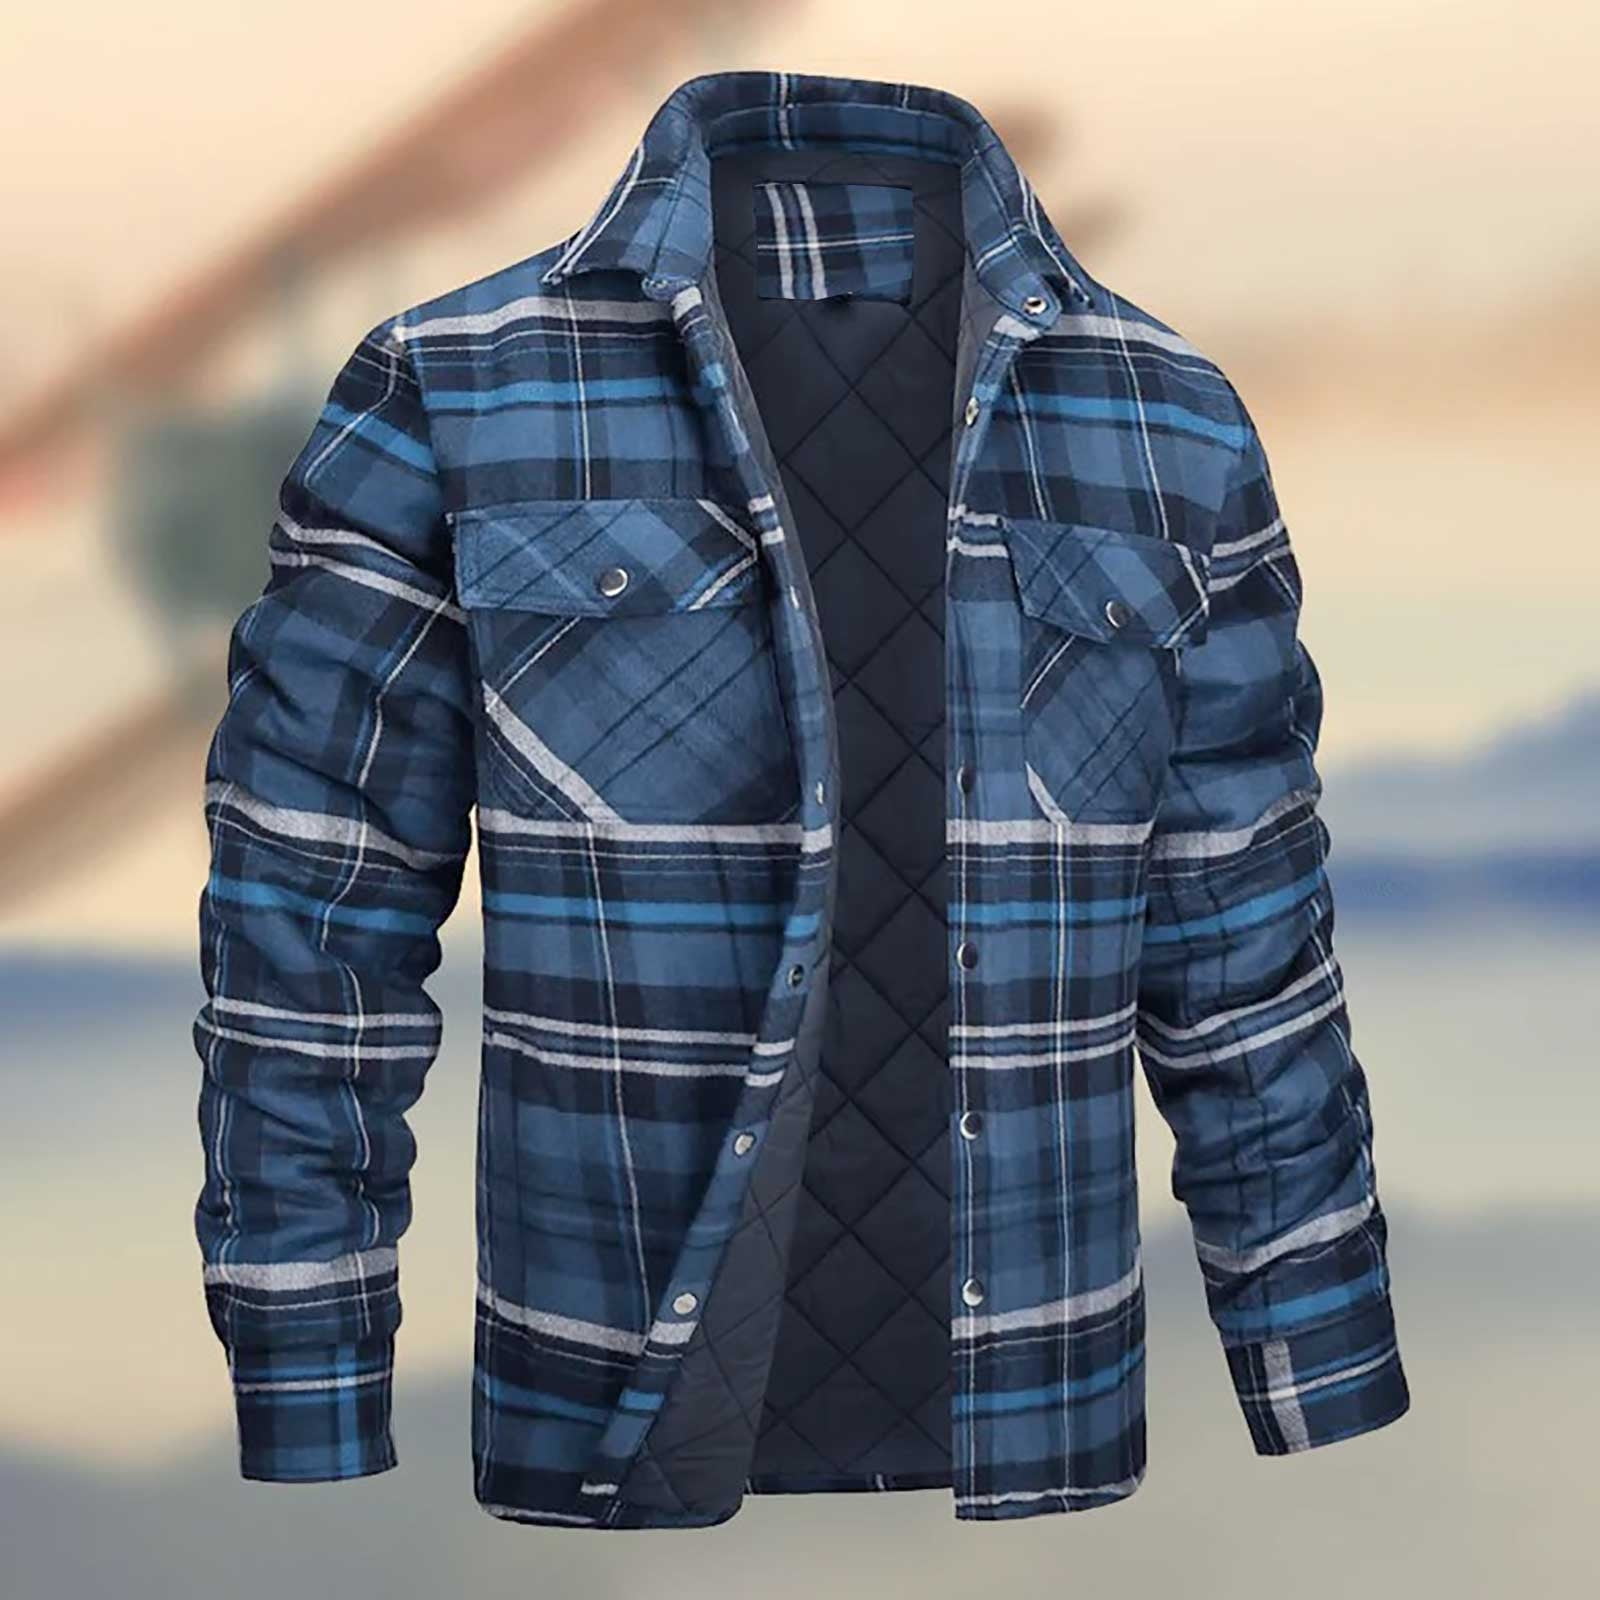 Men's Lined Hooded Flannel Shirt Jacket Quilted Plaid Coat Button Down ...